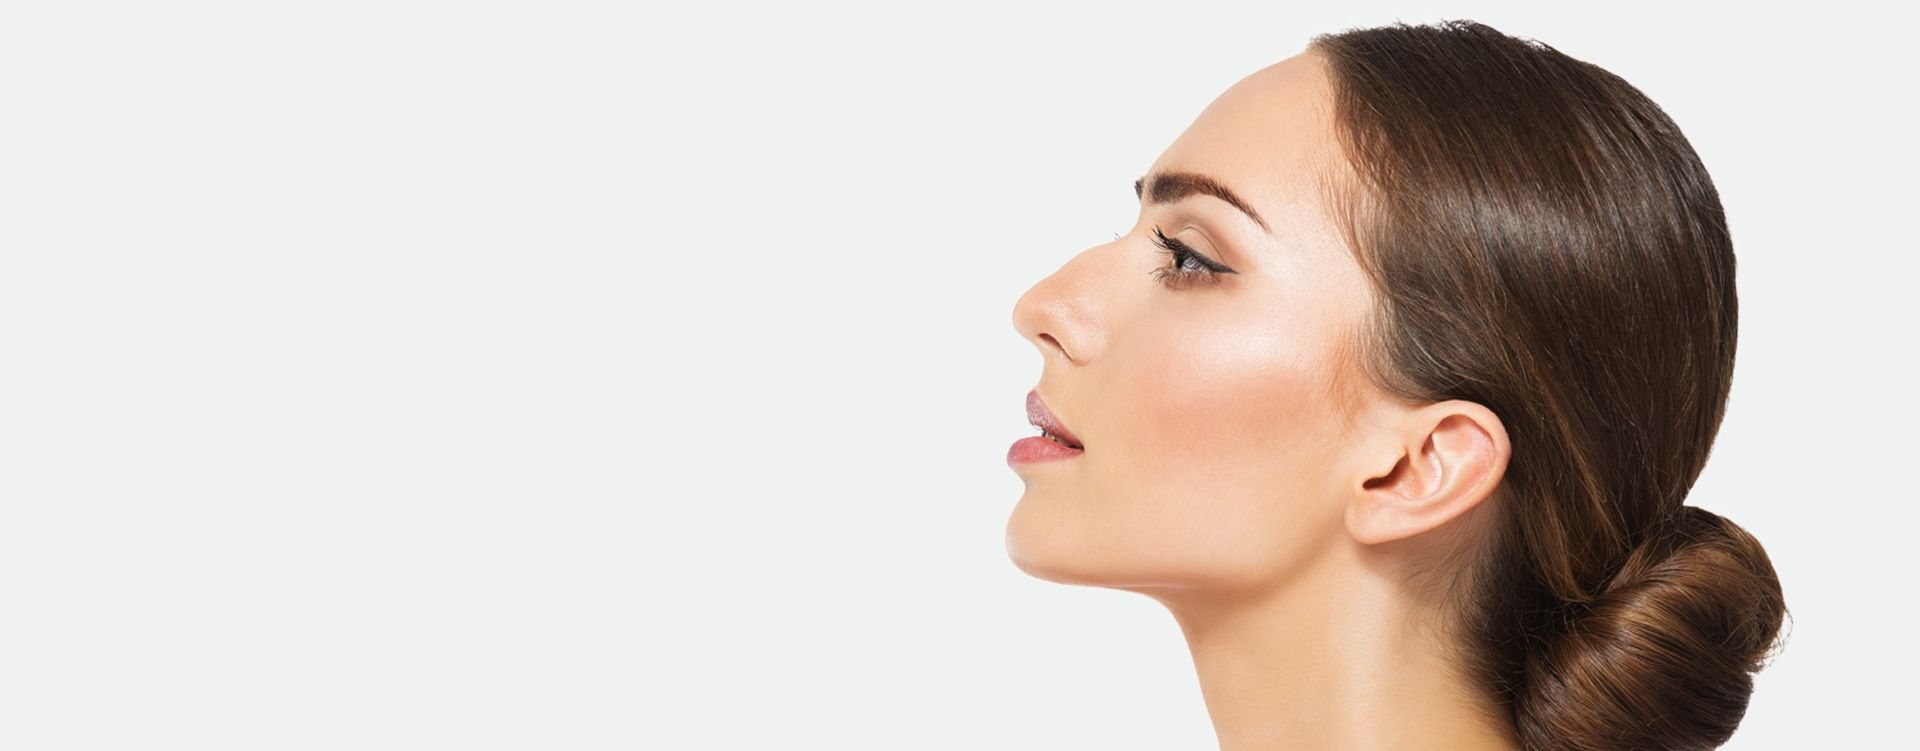 bump on nose treatment in london